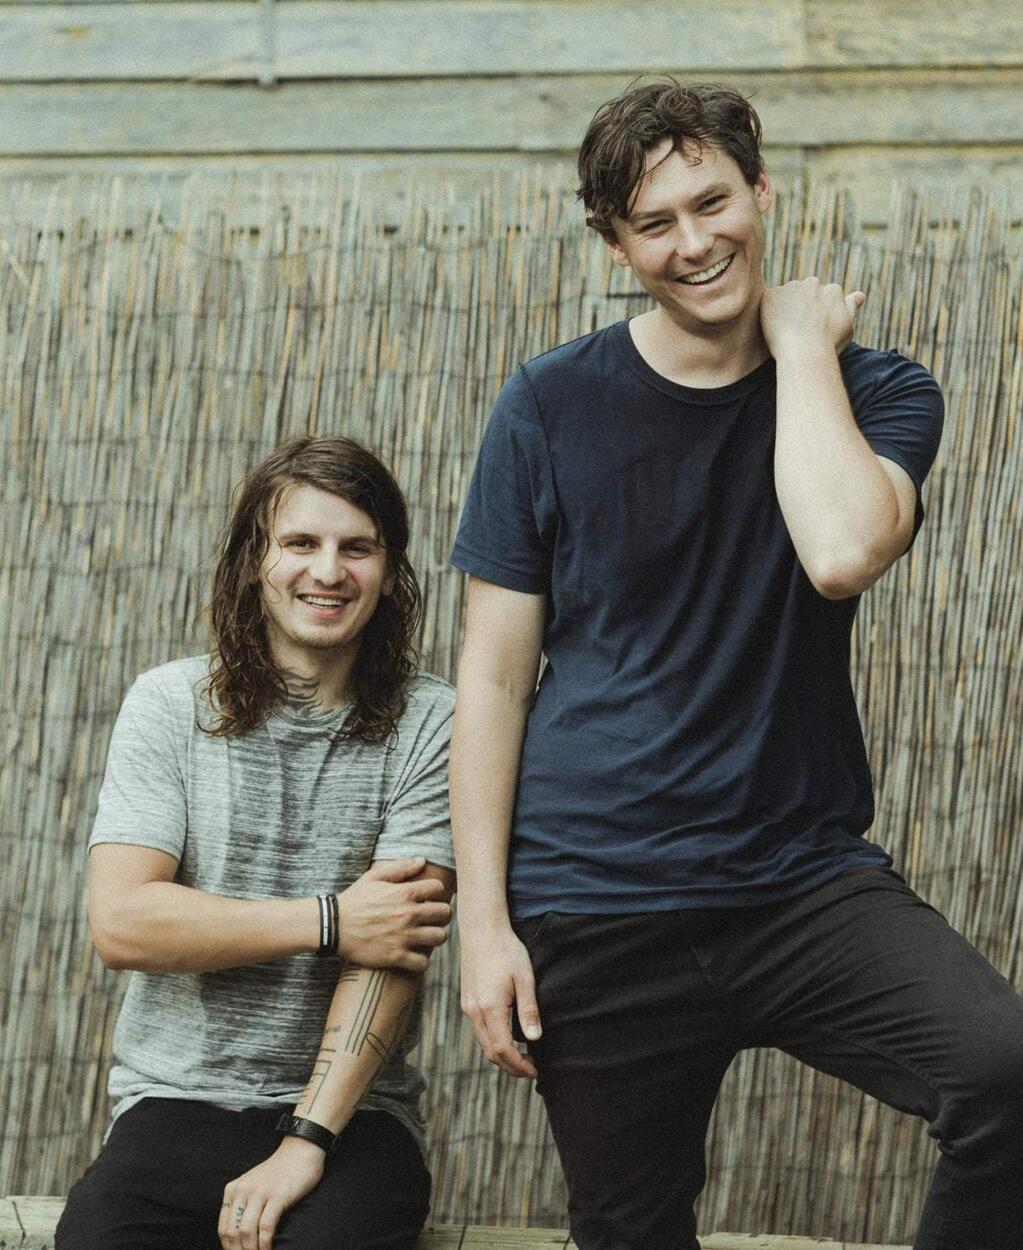 Brian Sella (vocals, guitar, lyricist) and Mathew Uychich, drums, of The Front Bottoms, an indie rock band from New Jersey.